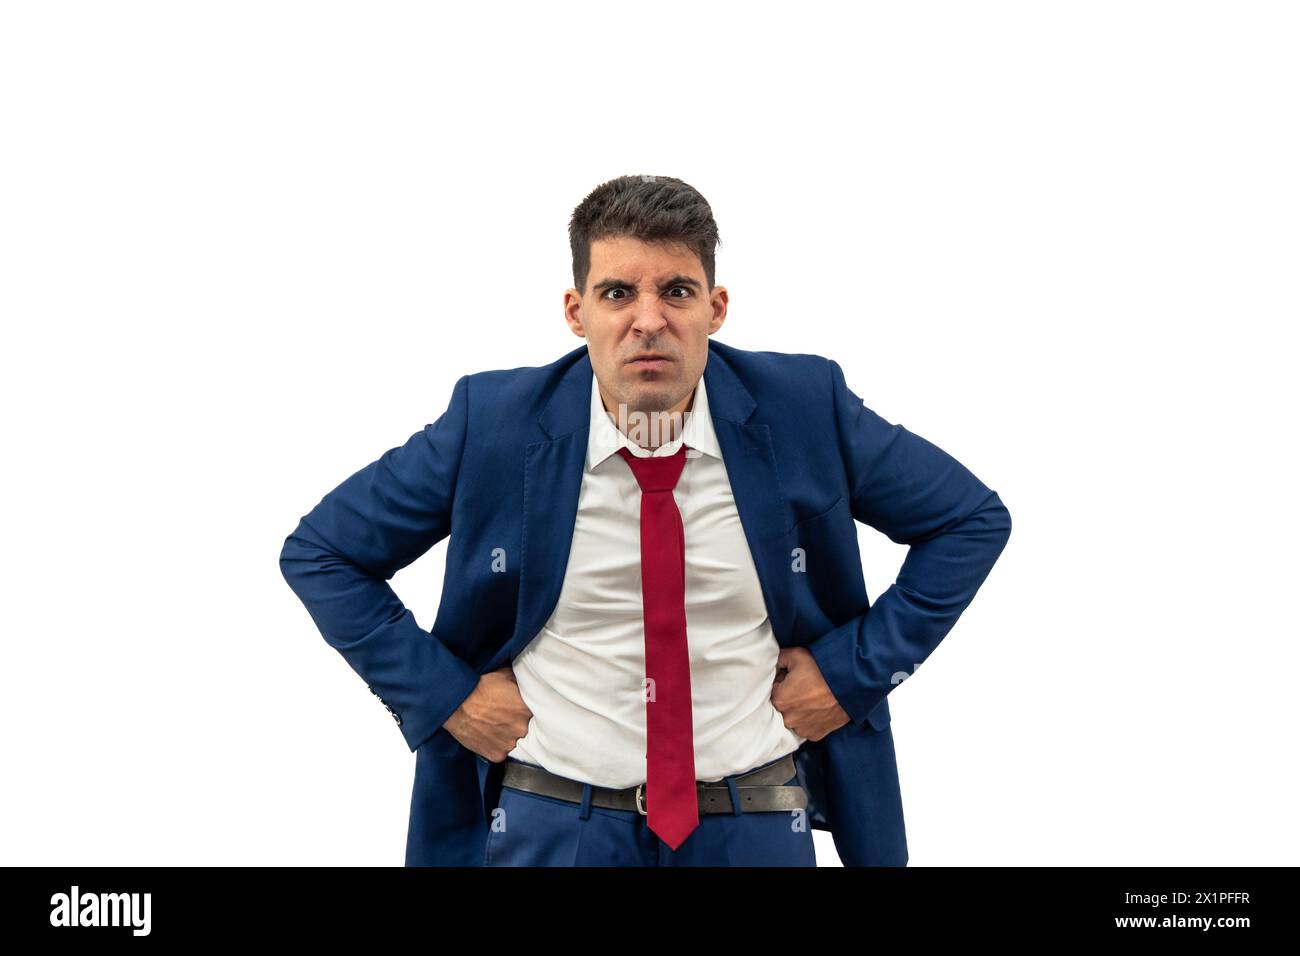 intense fury of a businessman as he glares furiously at the camera, with hands on hips displaying an attitude of anger and frustration.he embodies cor Stock Photo